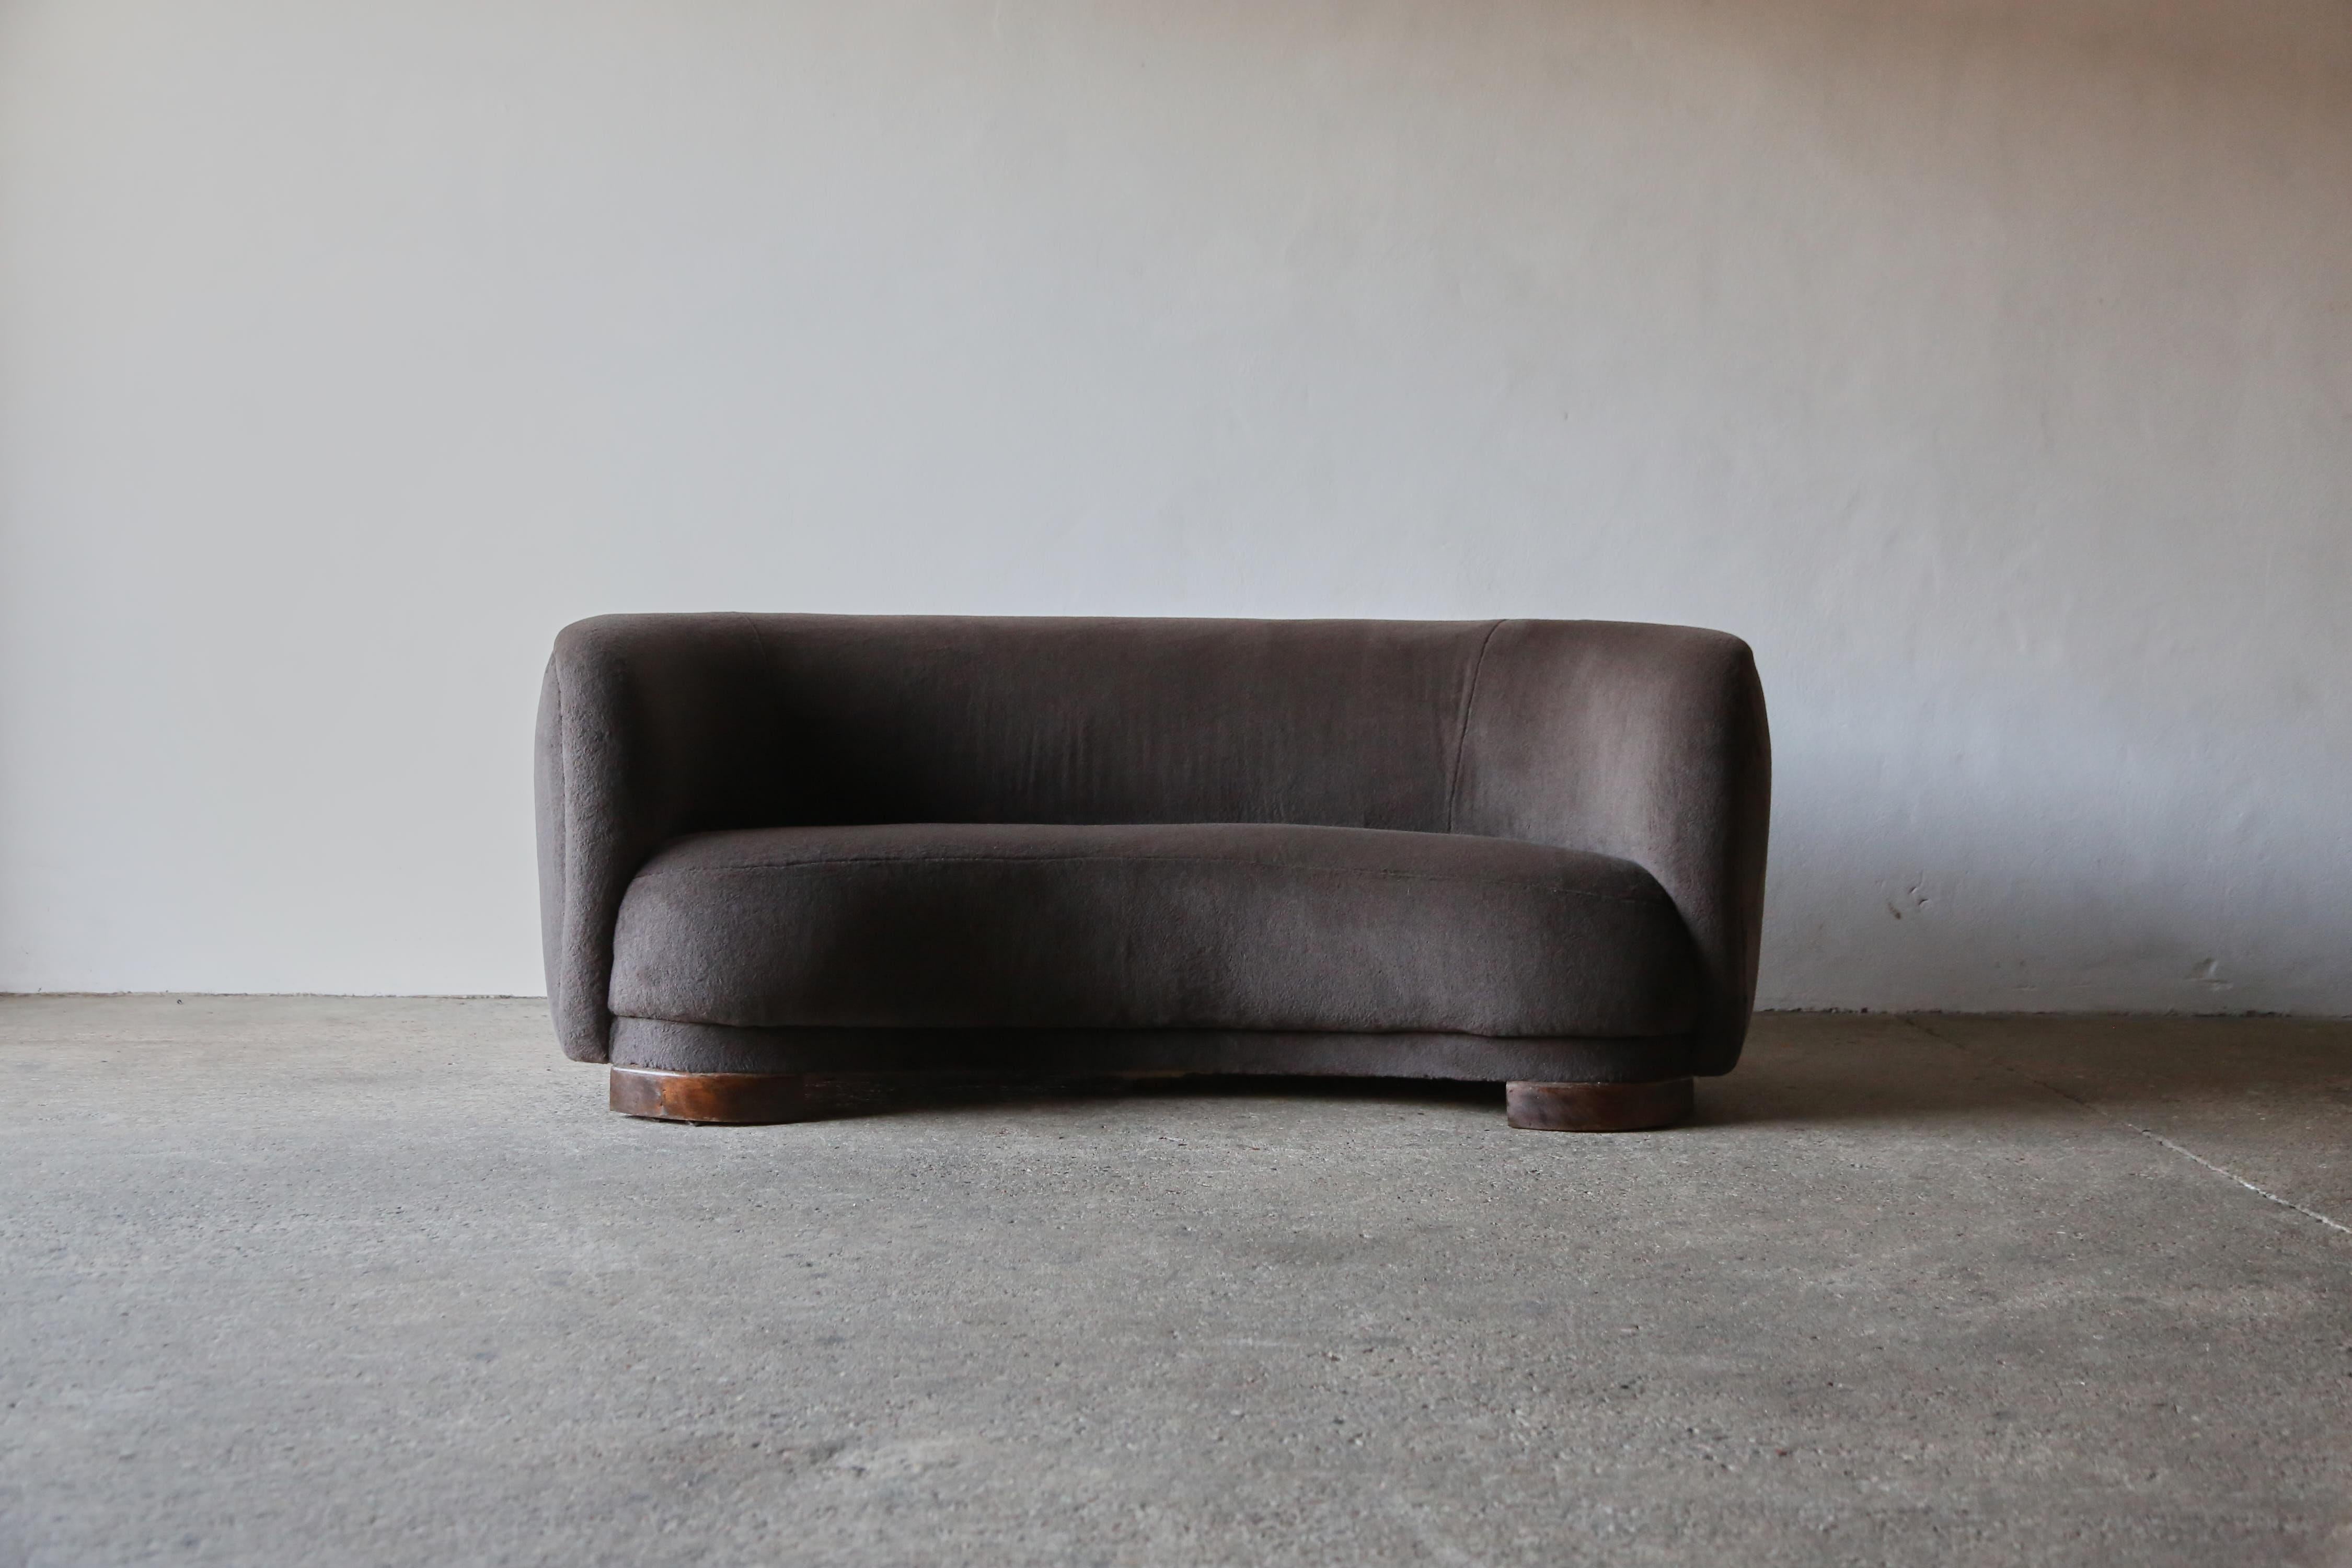 A superb curved 1940s Danish sofa, newly upholstered in a premium, brown/grey, 100% Alpaca fabric. Ships worldwide.






